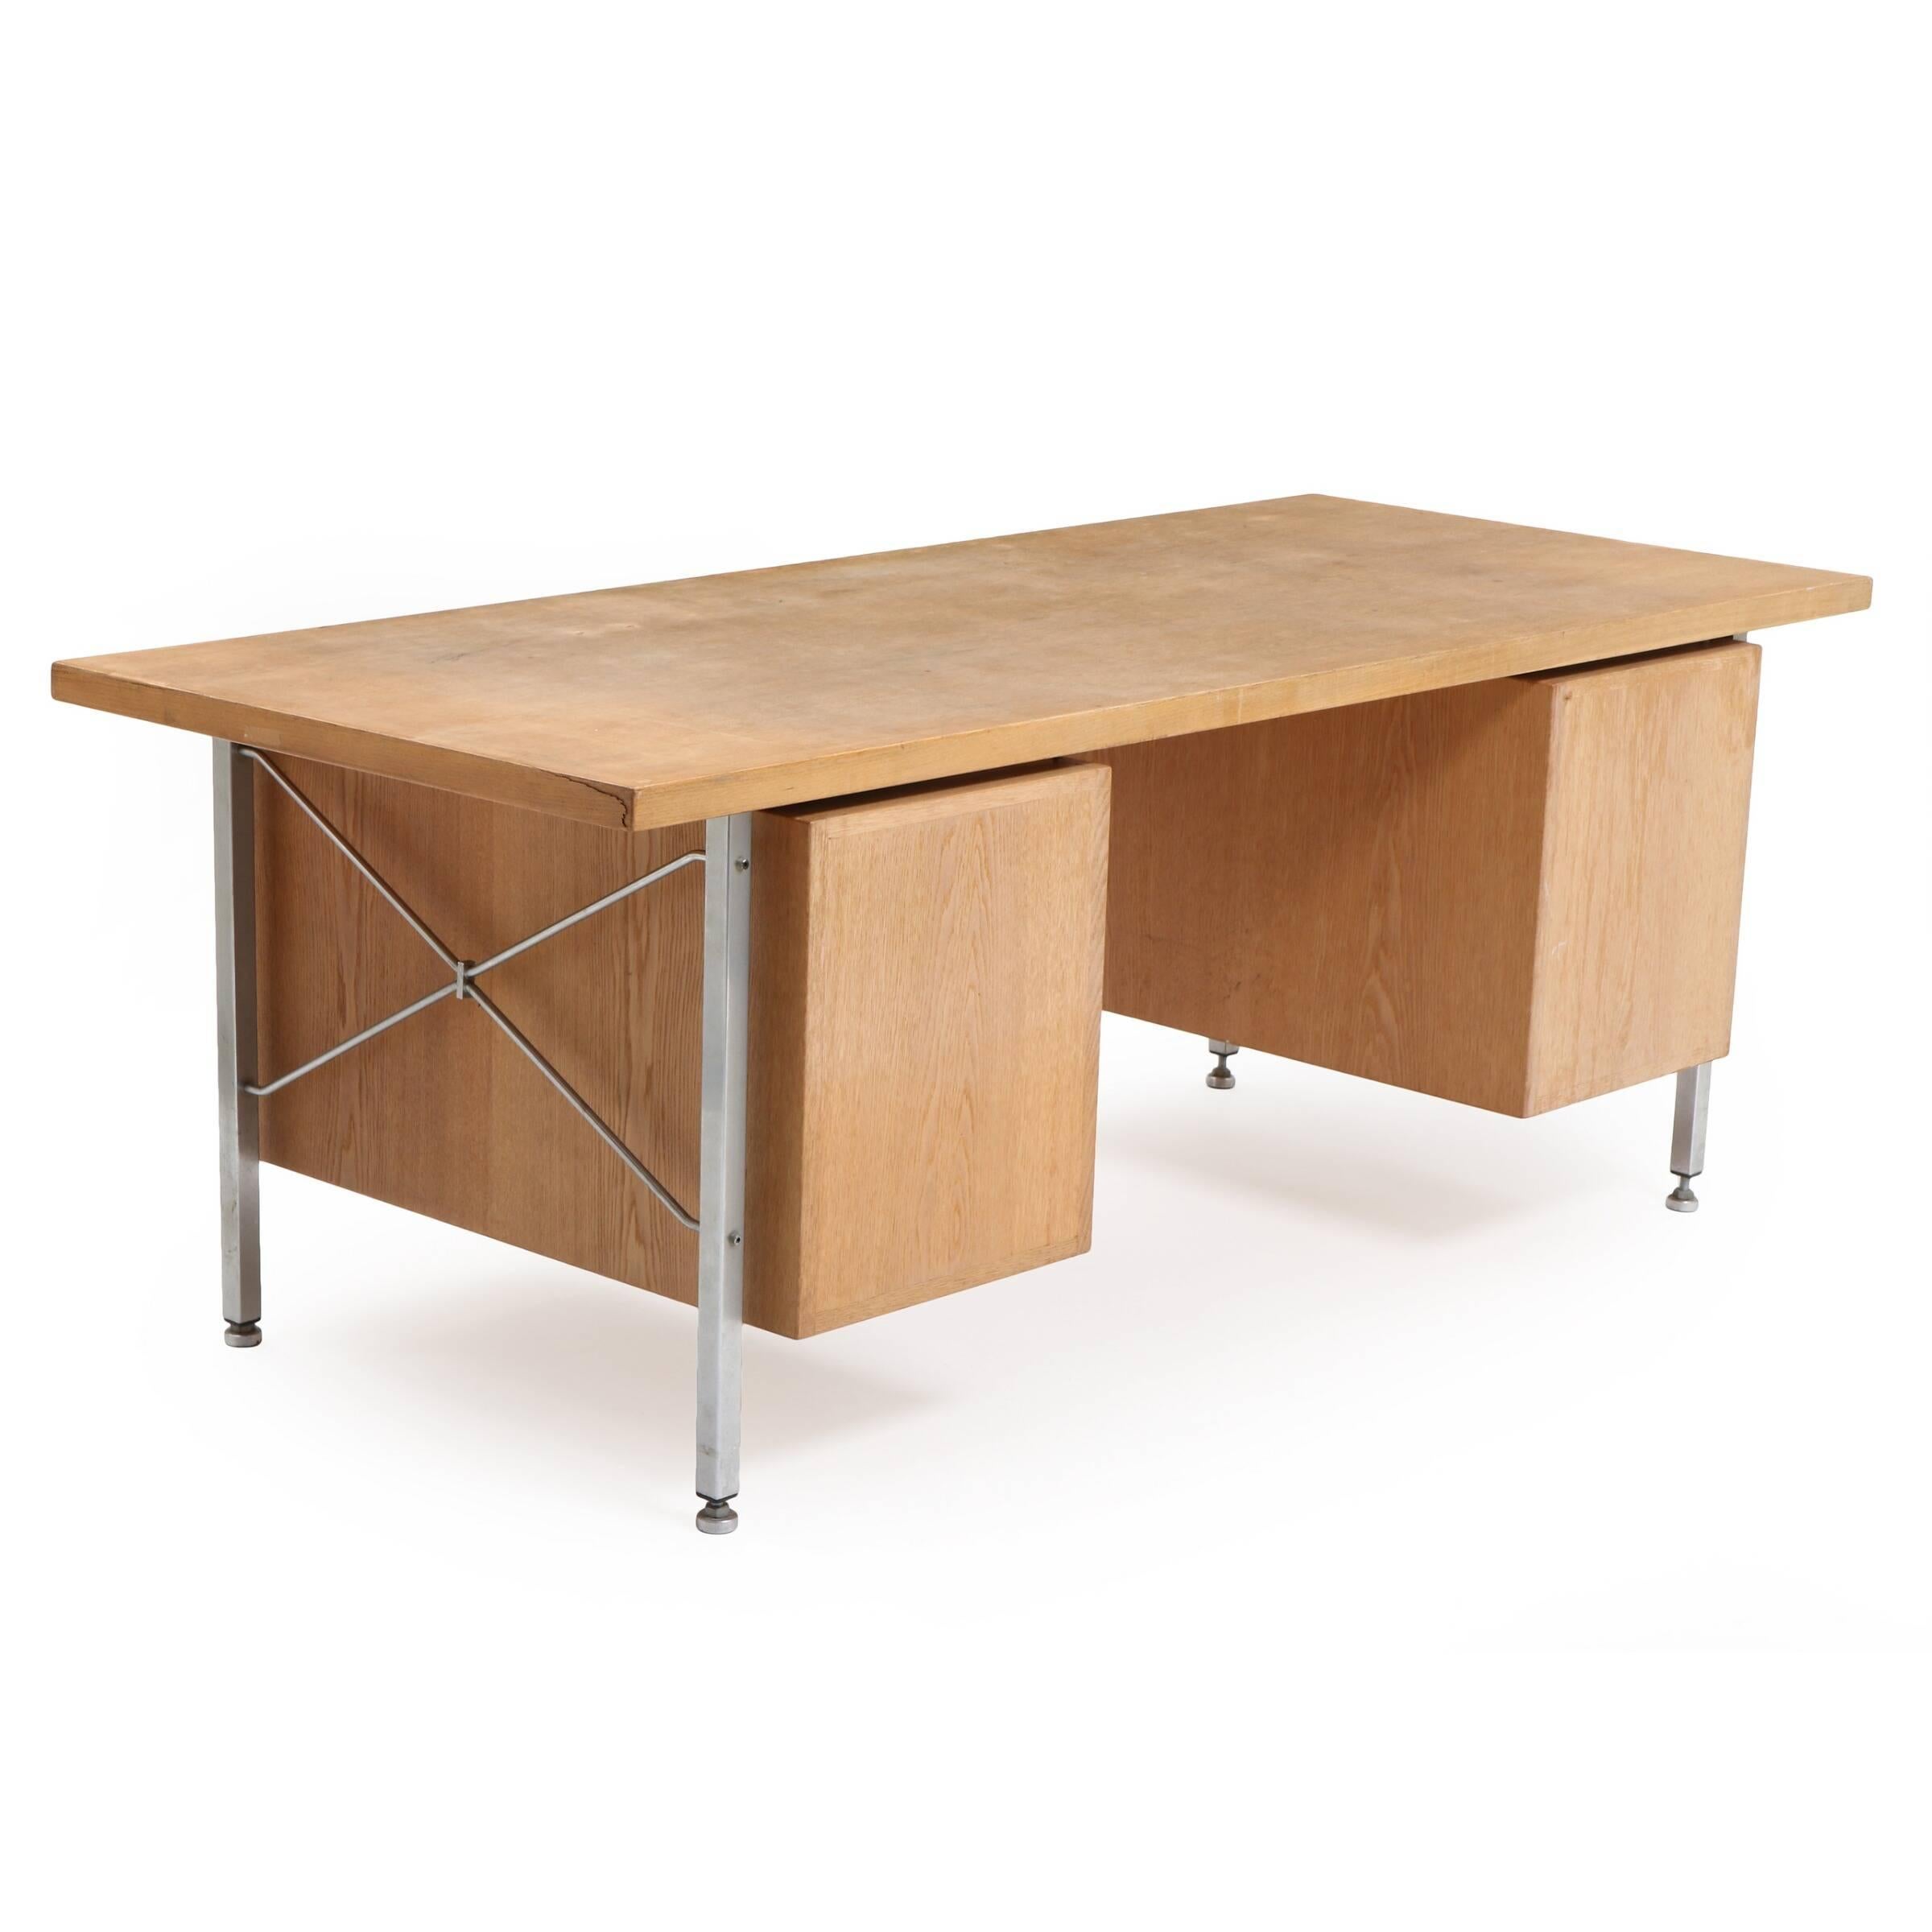 Designed by Hans Wegner, this oak desk with chromed steel frame and legs six drawers and two pull-out leaves. Made by cabinetmaker Johannes Hansen or possibly Plan Mobler in the 1960s or 1970s. Measures: H 73, L 197, W 82 cm.

  